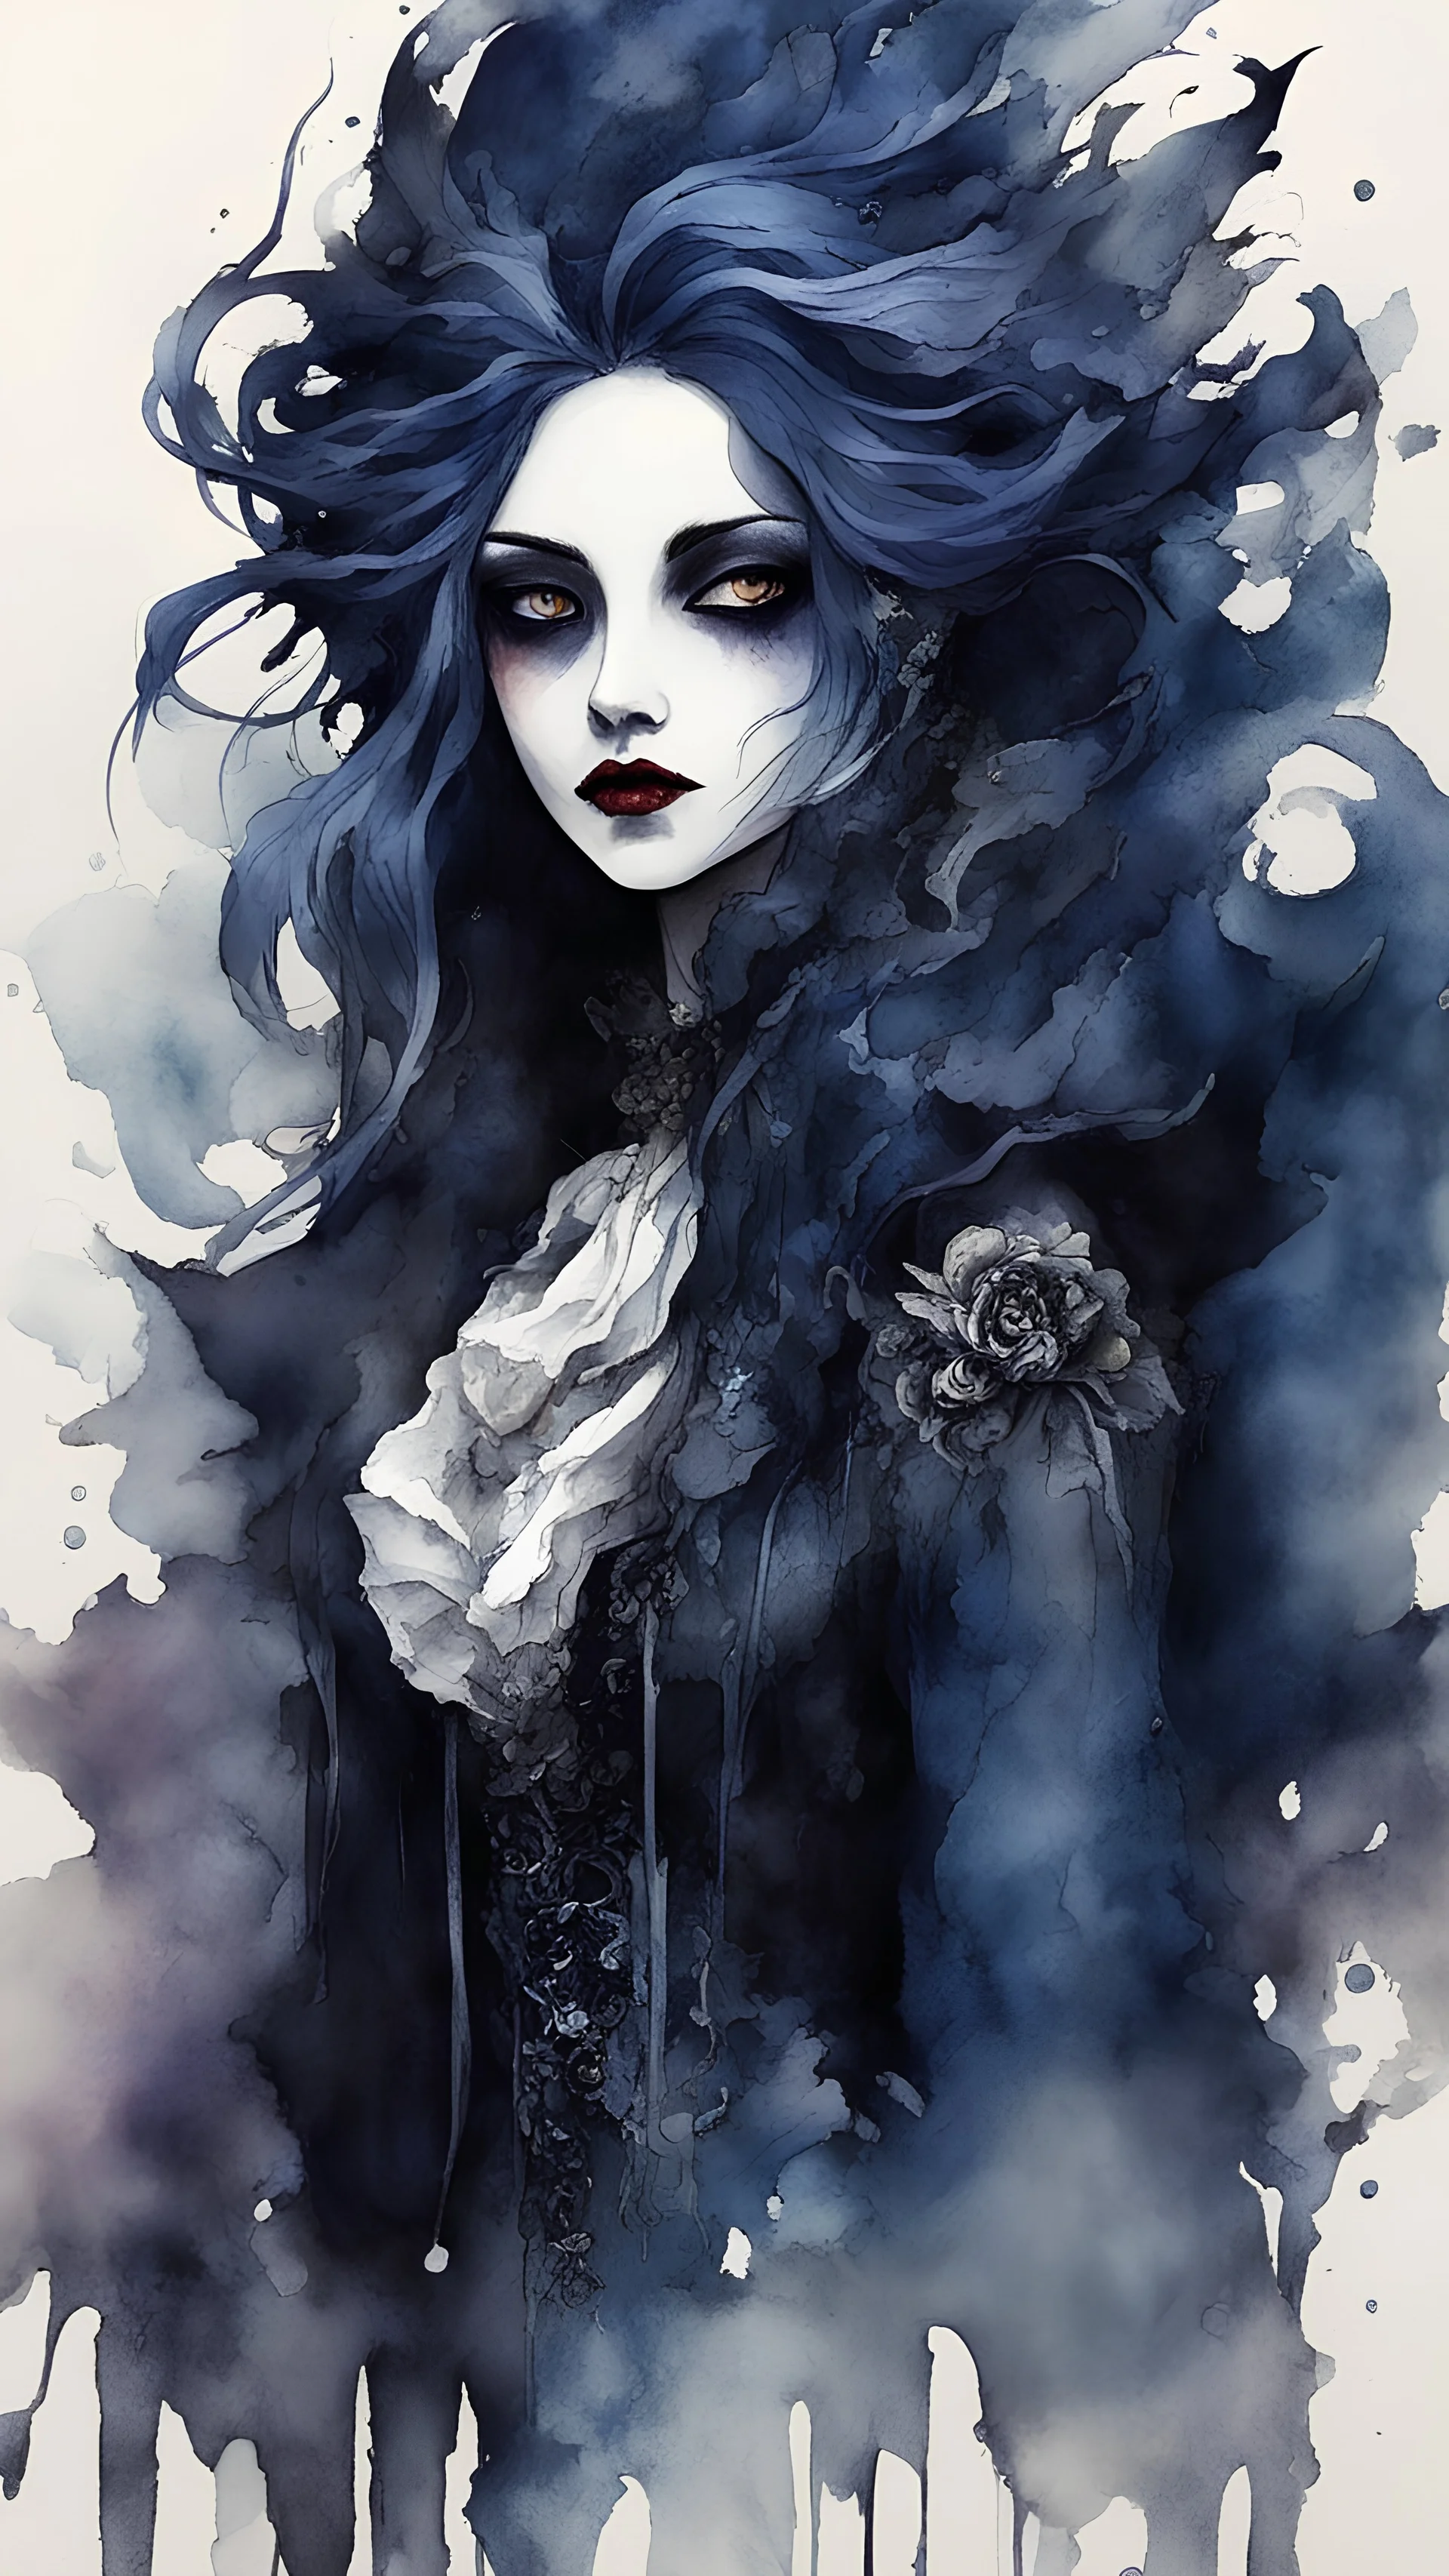 an deeply abstract ink wash and watercolor illustration of a Goth vampire girl with highly detailed hair and facial features , in the abstract expressionist style, indigo and jasper, ragged and torn Victorian costumes, hard , gritty, and edgy depictions, full body, fullshot, vibrant forms, Shironuri, Mori Kei, ethereal, otherworldly